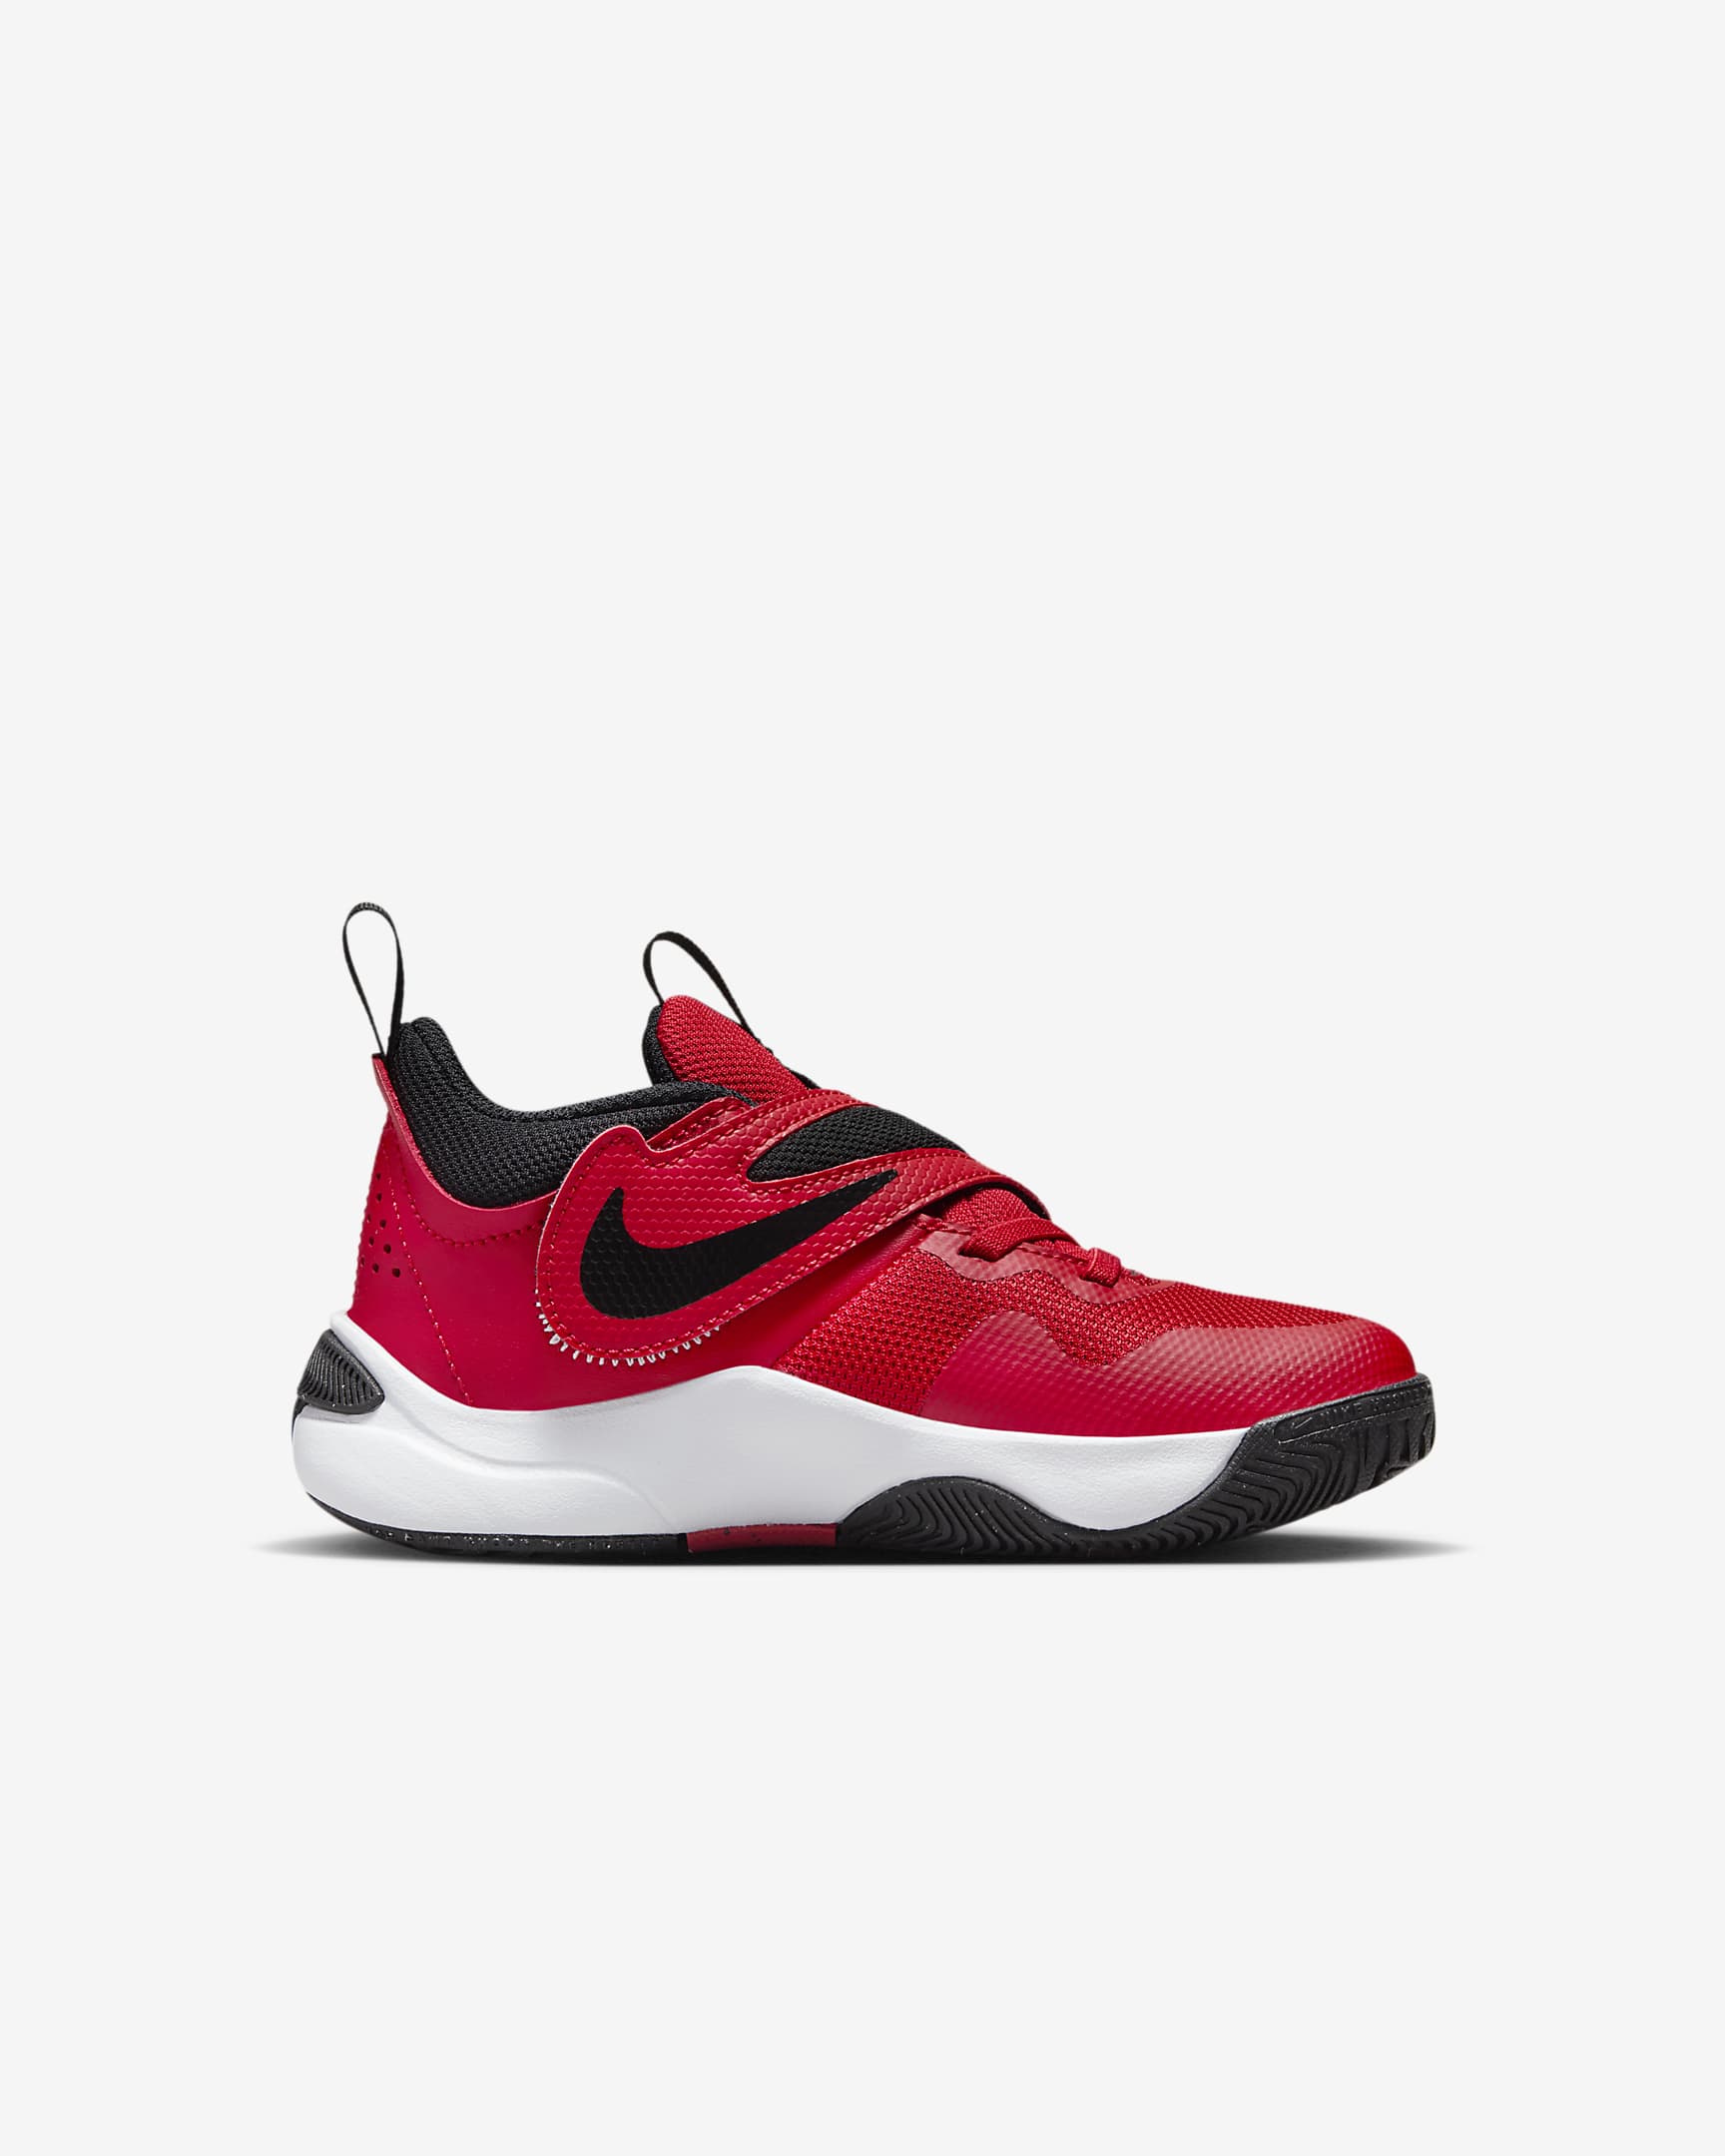 Nike Team Hustle D 11 Younger Kids' Shoes. Nike CH